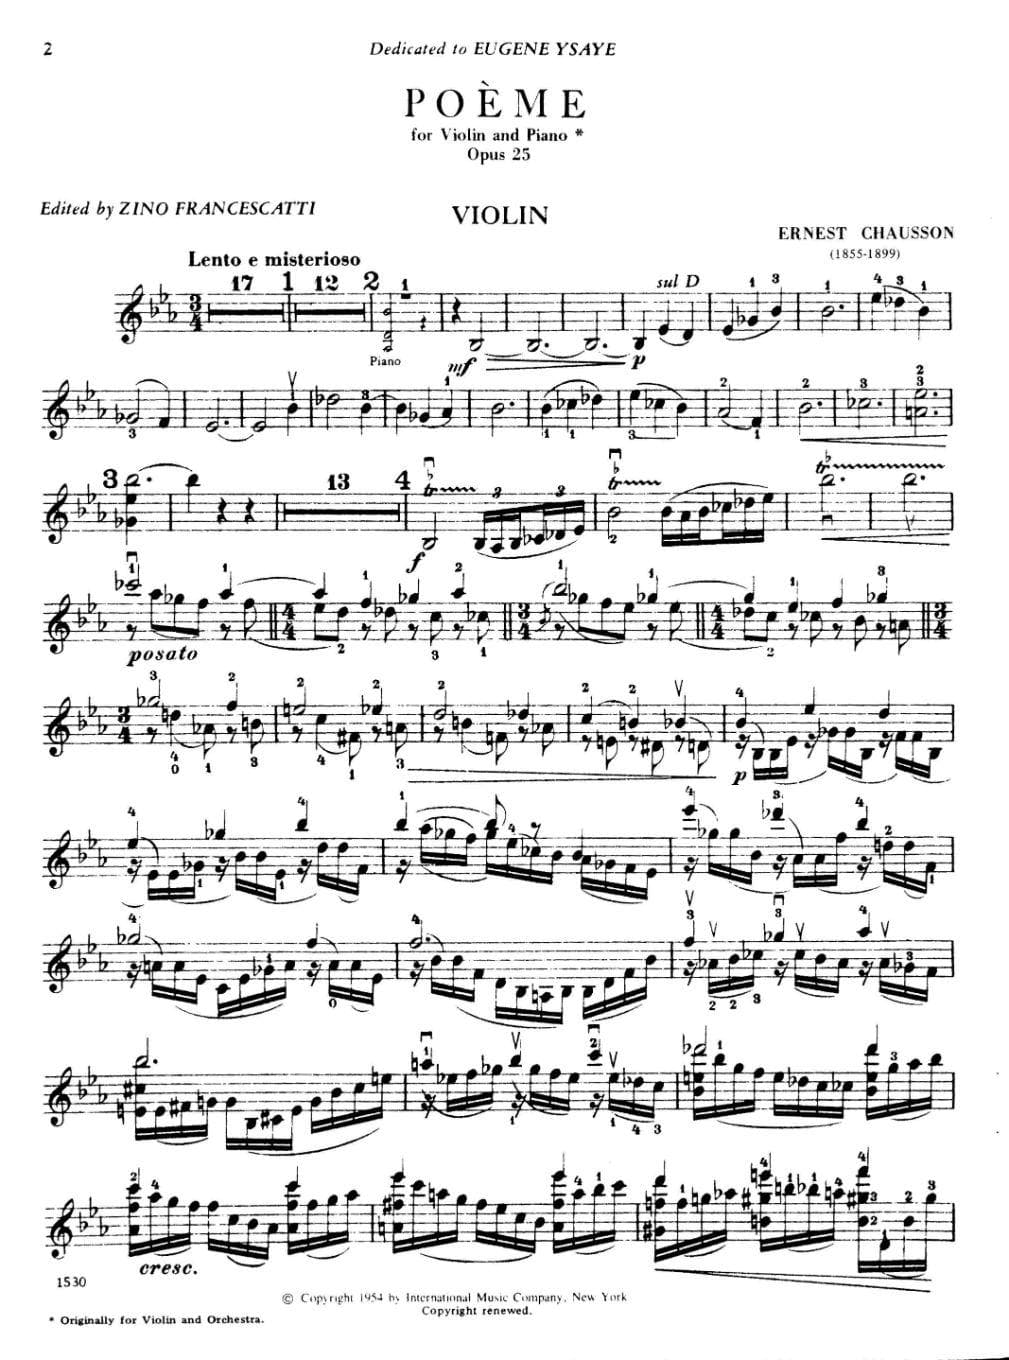 Chausson, Ernest - Poeme Op 25 for Violin and Piano - Arranged by Francescatti - International Edition